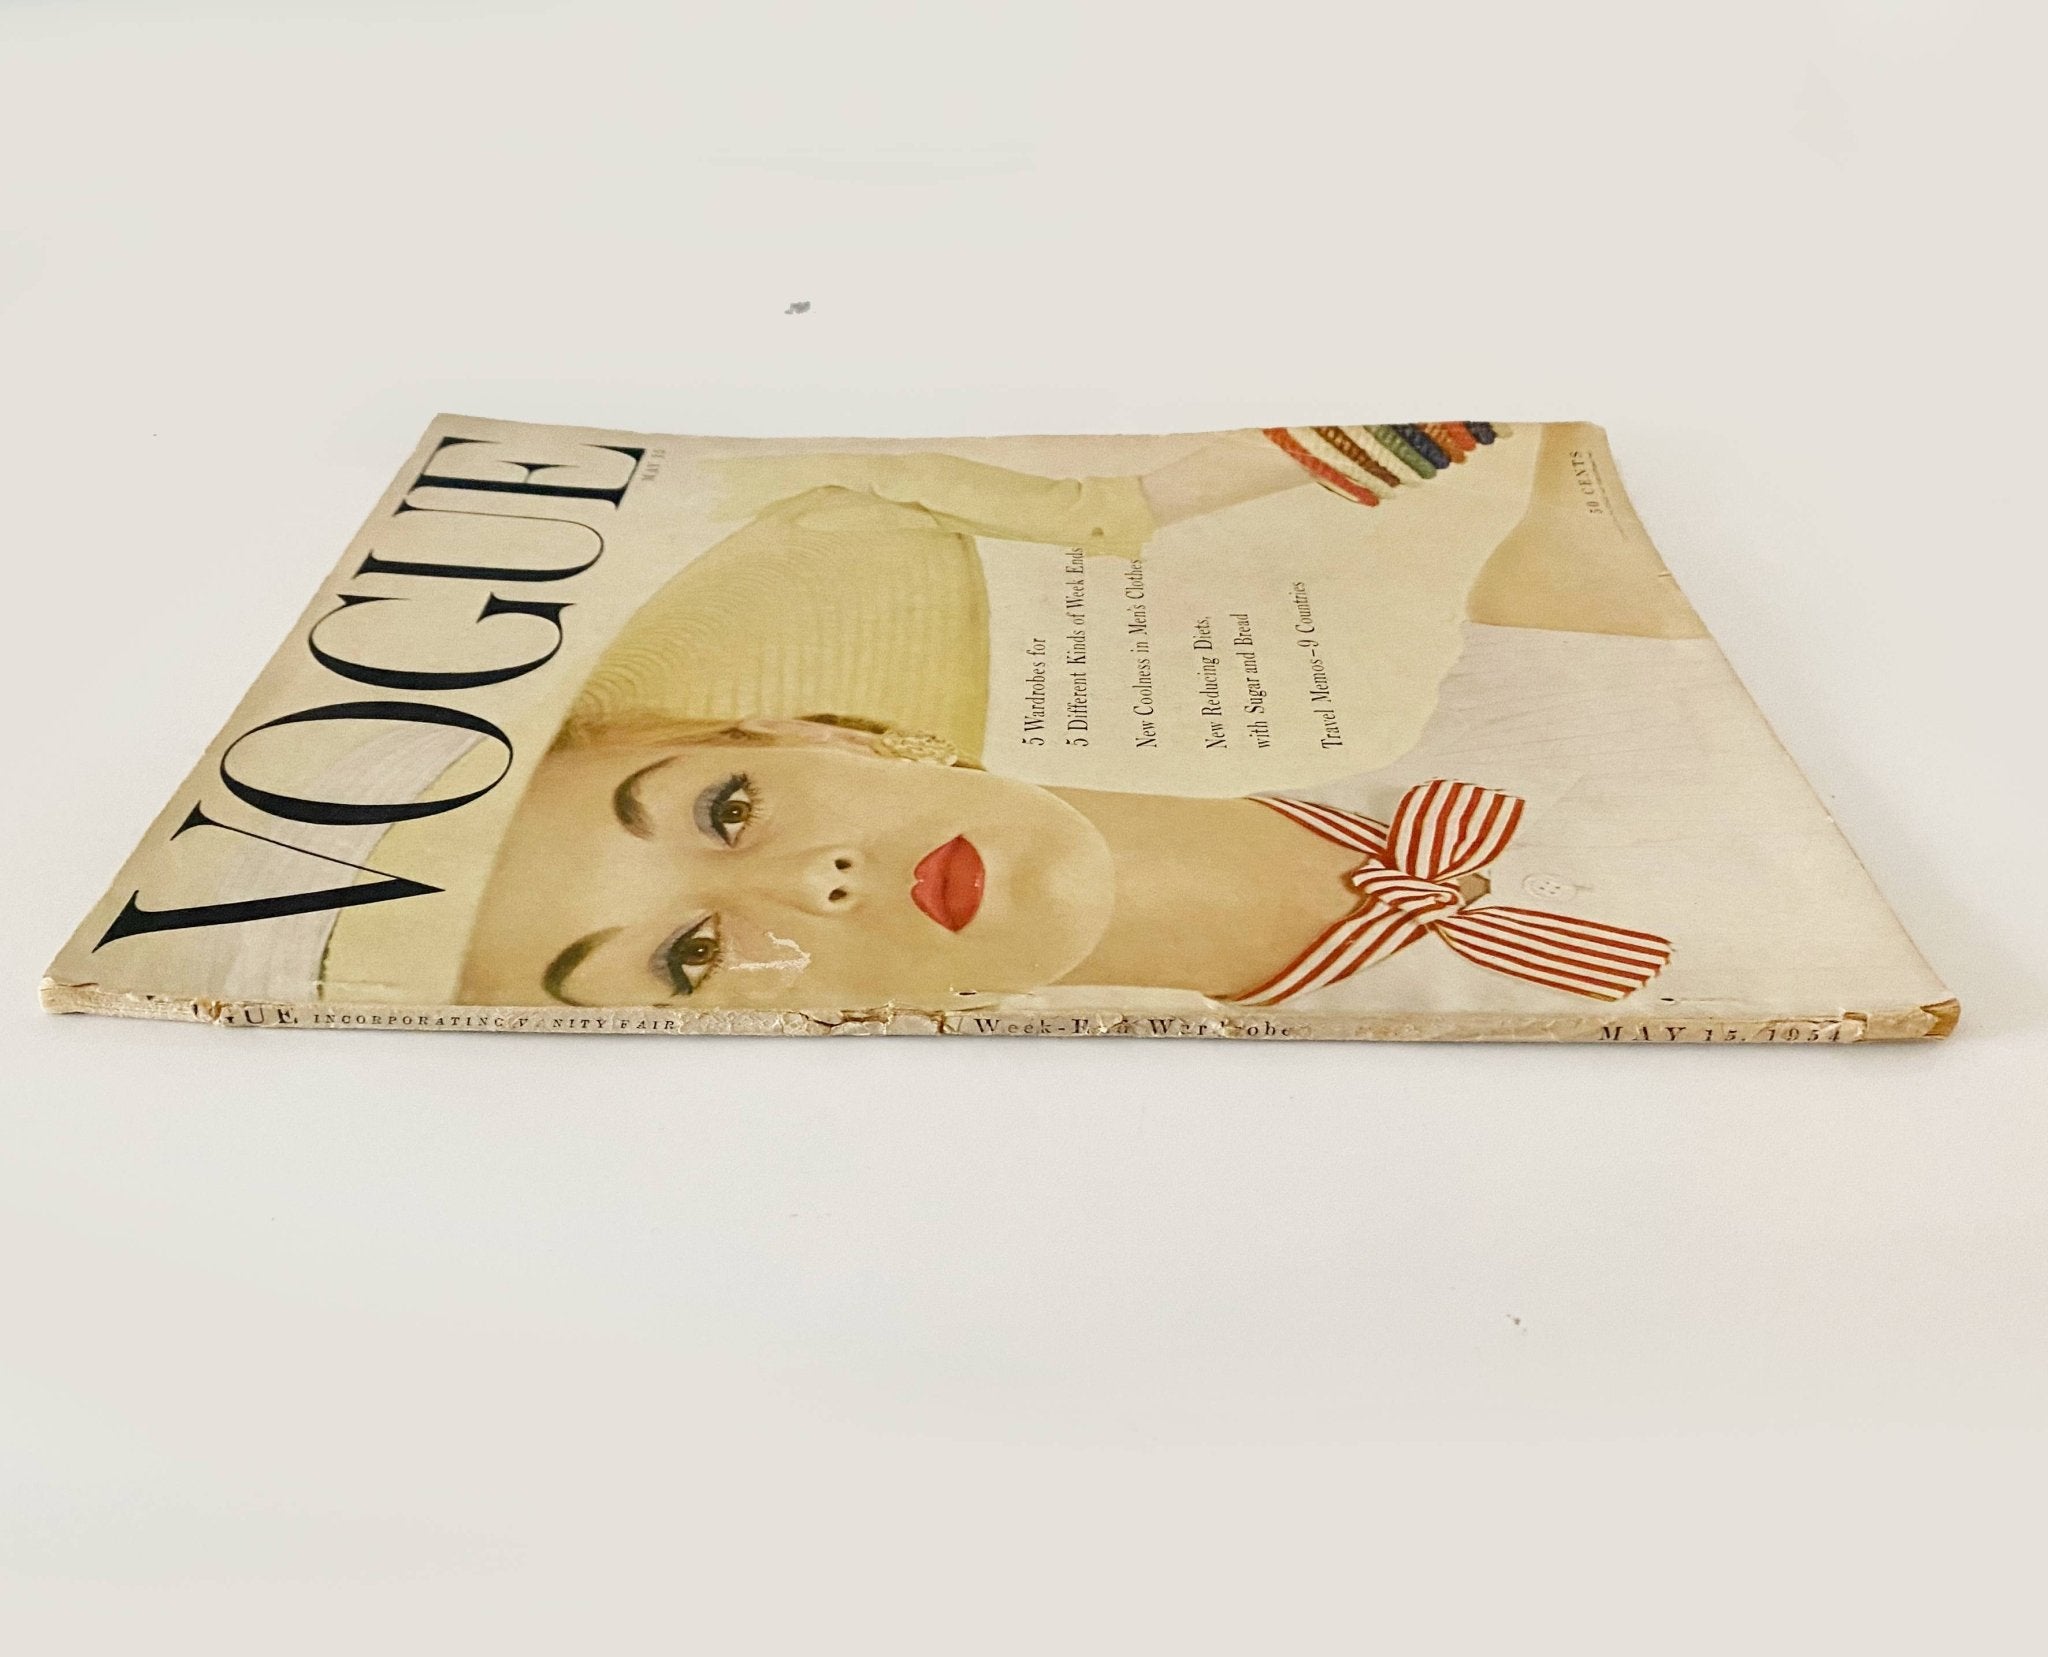 1954 AMERICAN VOGUE "A YOUNG WOMAN WHO MAY BE ON HER WAY"- COVER BY ERWIN BLUMENFELD - style - CHNGR